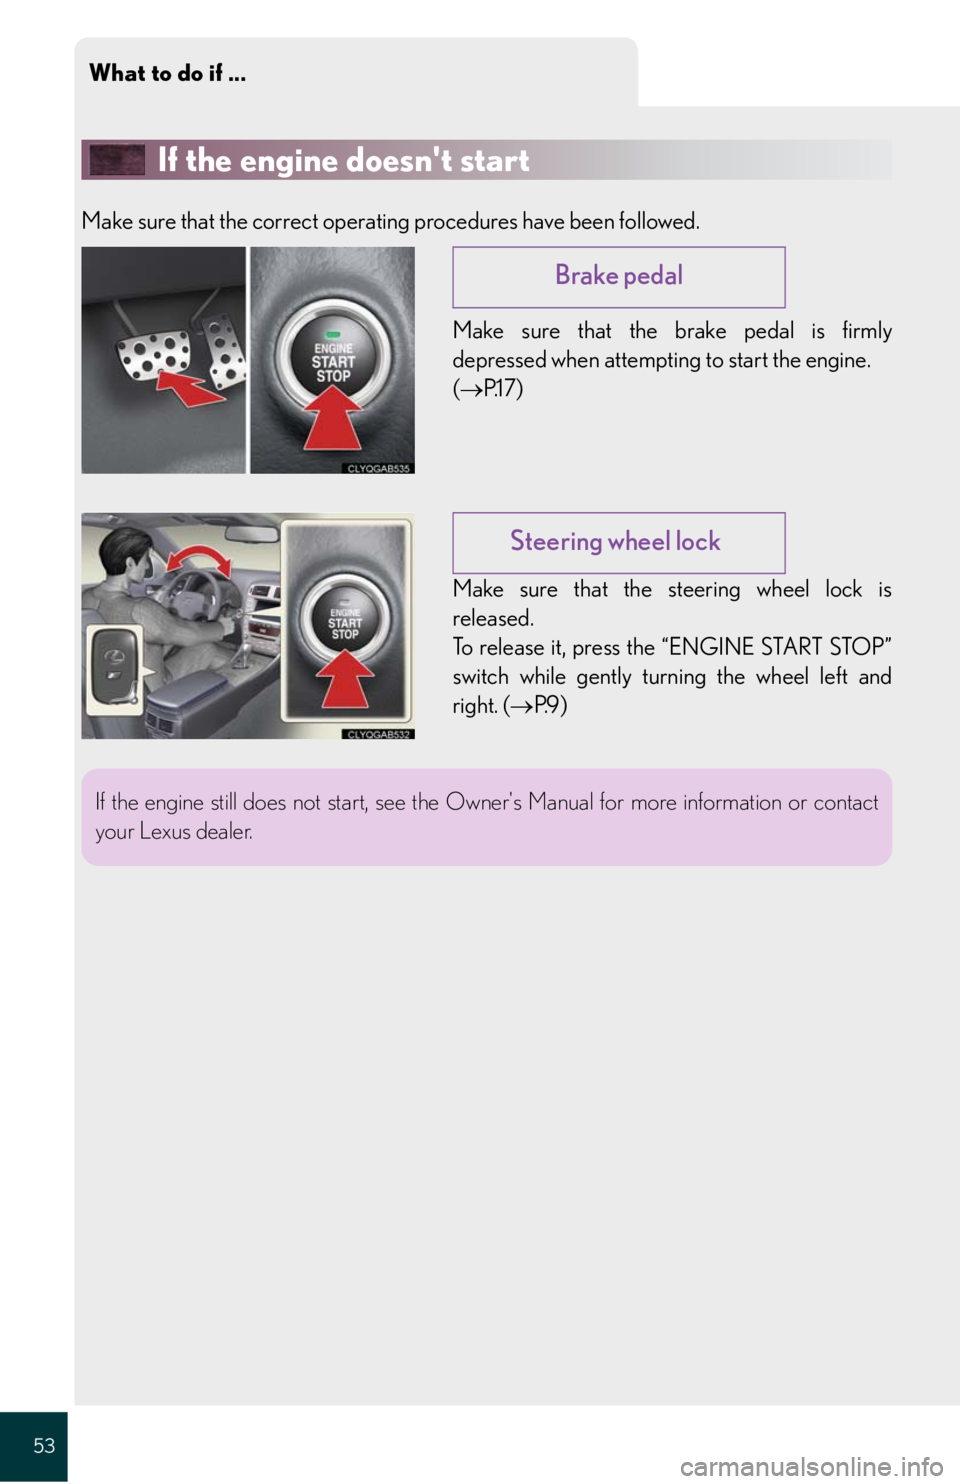 Lexus IS F 2008  Audio/video System / LEXUS 2008 IS F QUICK GUIDE OWNERS MANUAL (OM53613U) What to do if ...
53
If the engine doesnt start
Make sure that the correct operating procedures have been followed.
Make sure that the brake pedal is firmly
depressed when attempting to start the eng